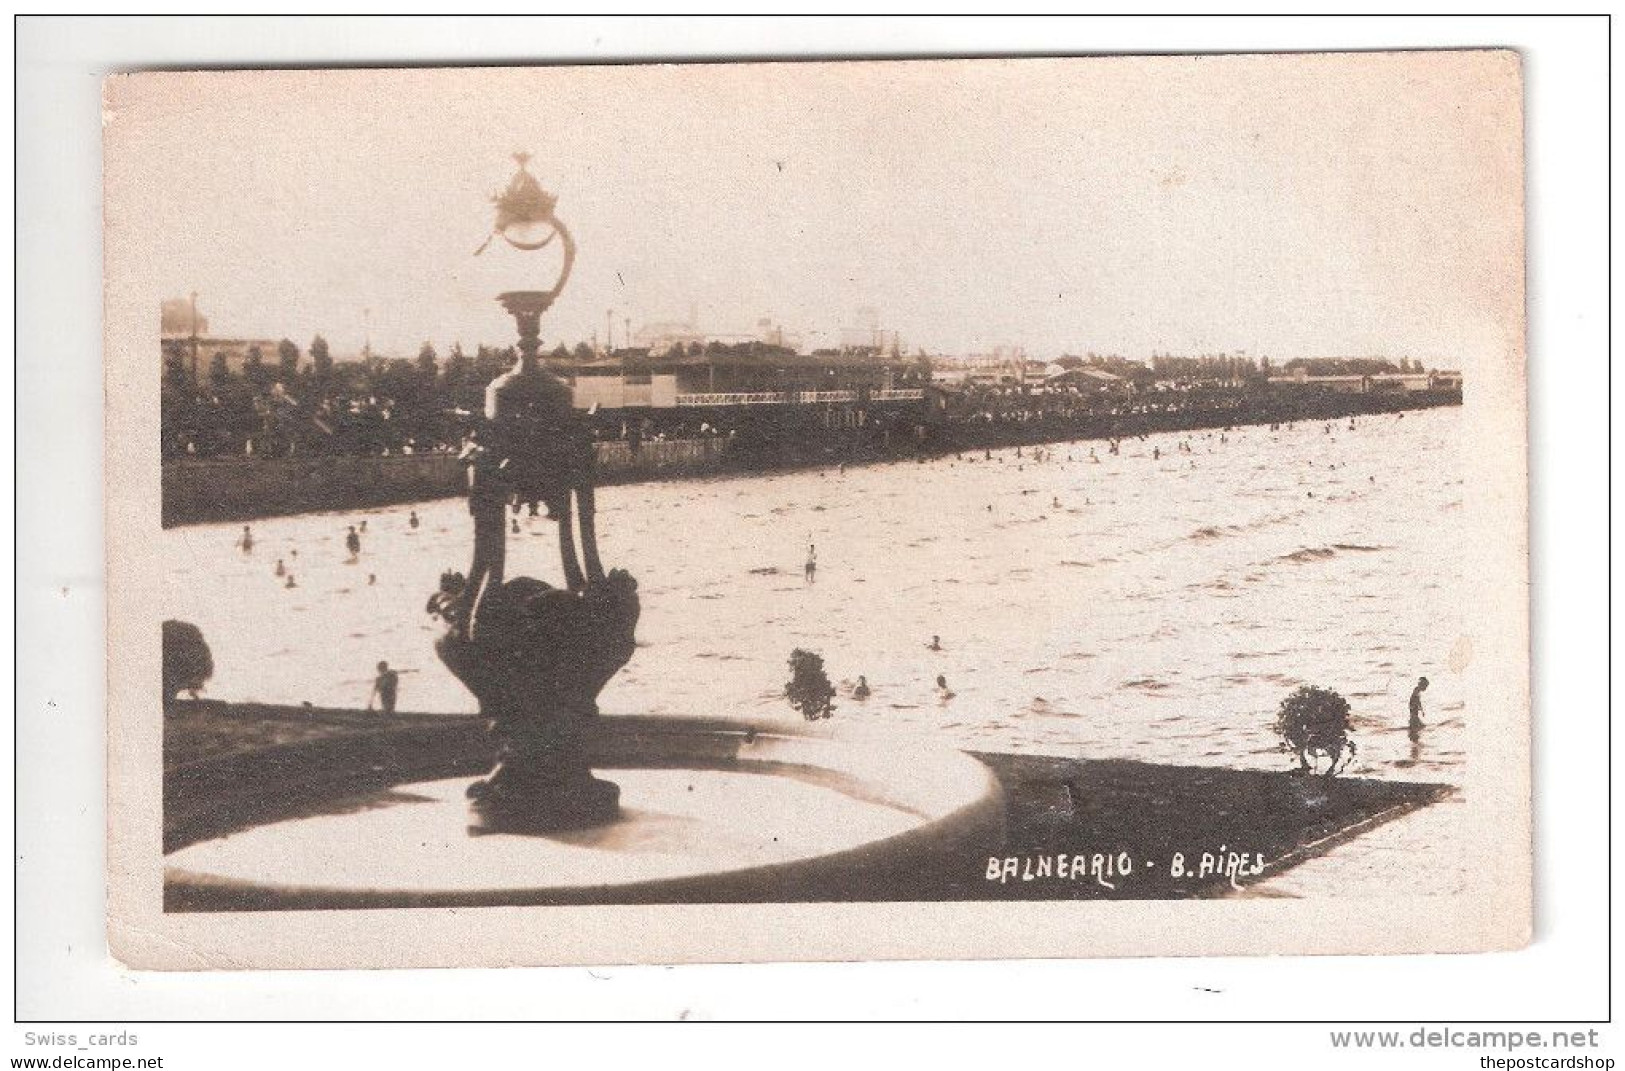 ARGENTINE - ARGENTINA - Buenos Aires BALNEARIO USED LIDO SWIMMING POOL  I CLYDE ROAD  WEST DIDSBURY  MANCHESTER  3/7/192 - Argentine